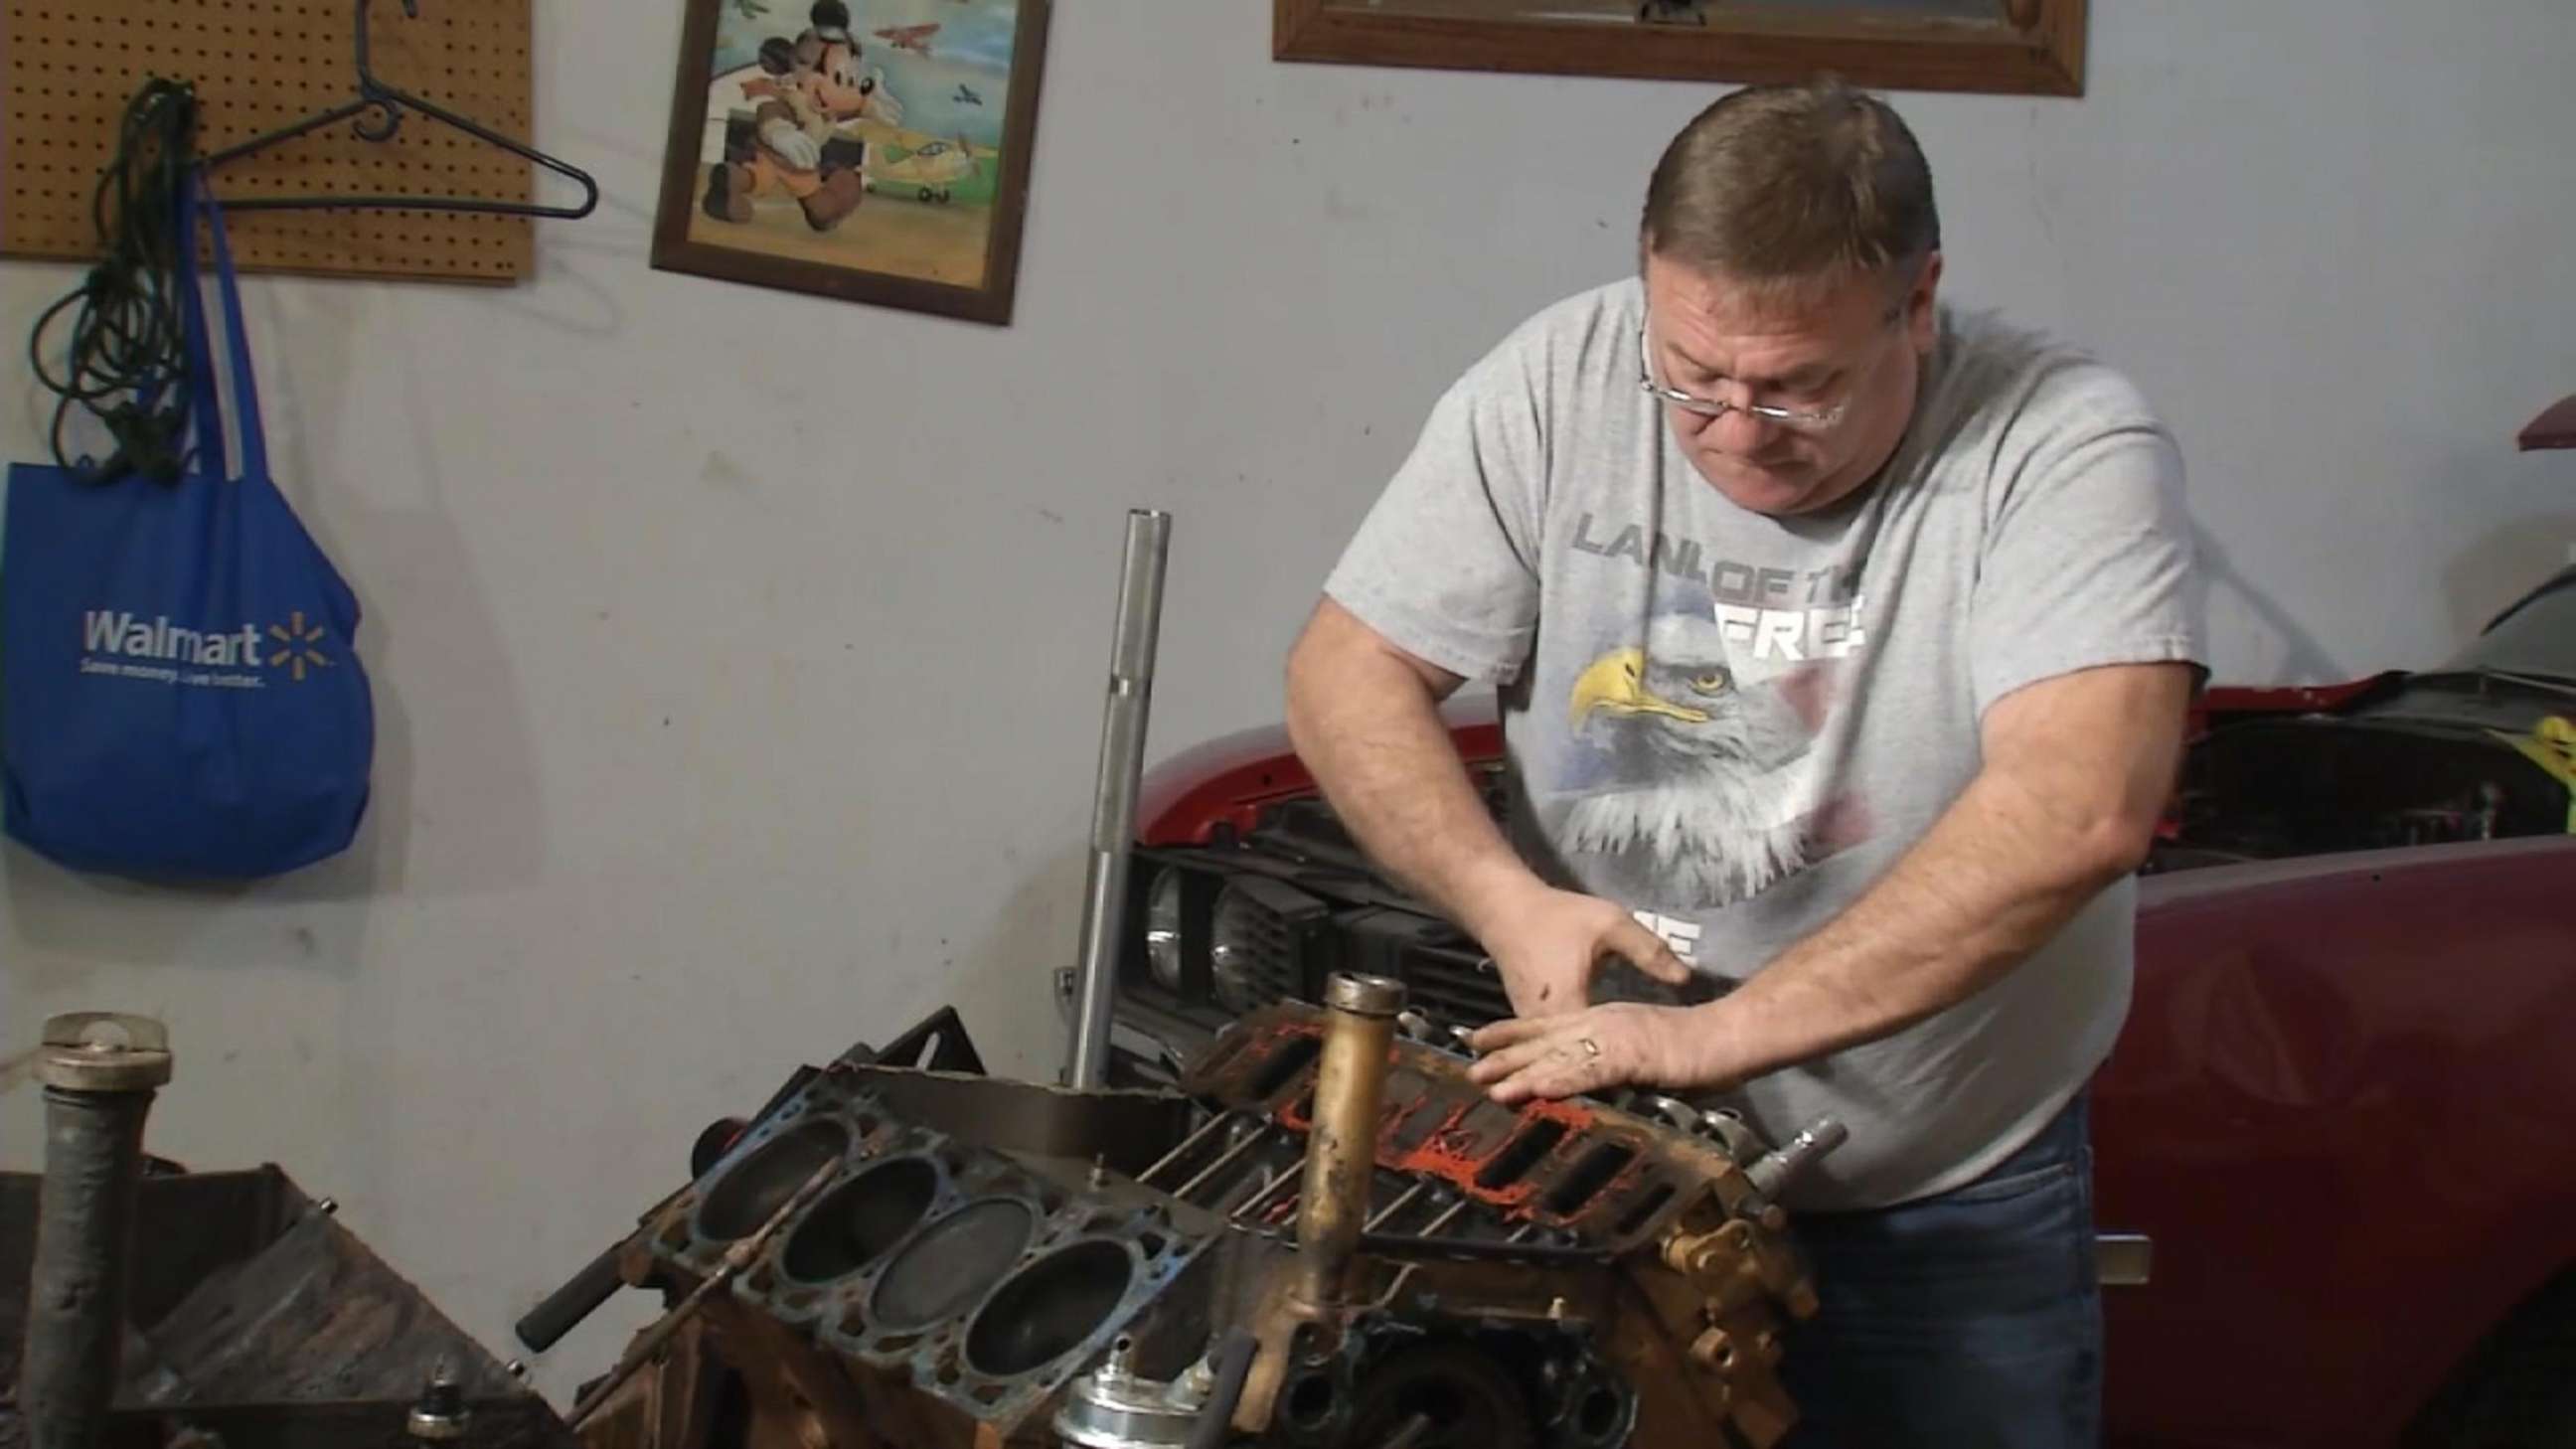 PHOTO: Will Frye found a wedding ring while replacing the motor for his 1969 Oldsmobile.